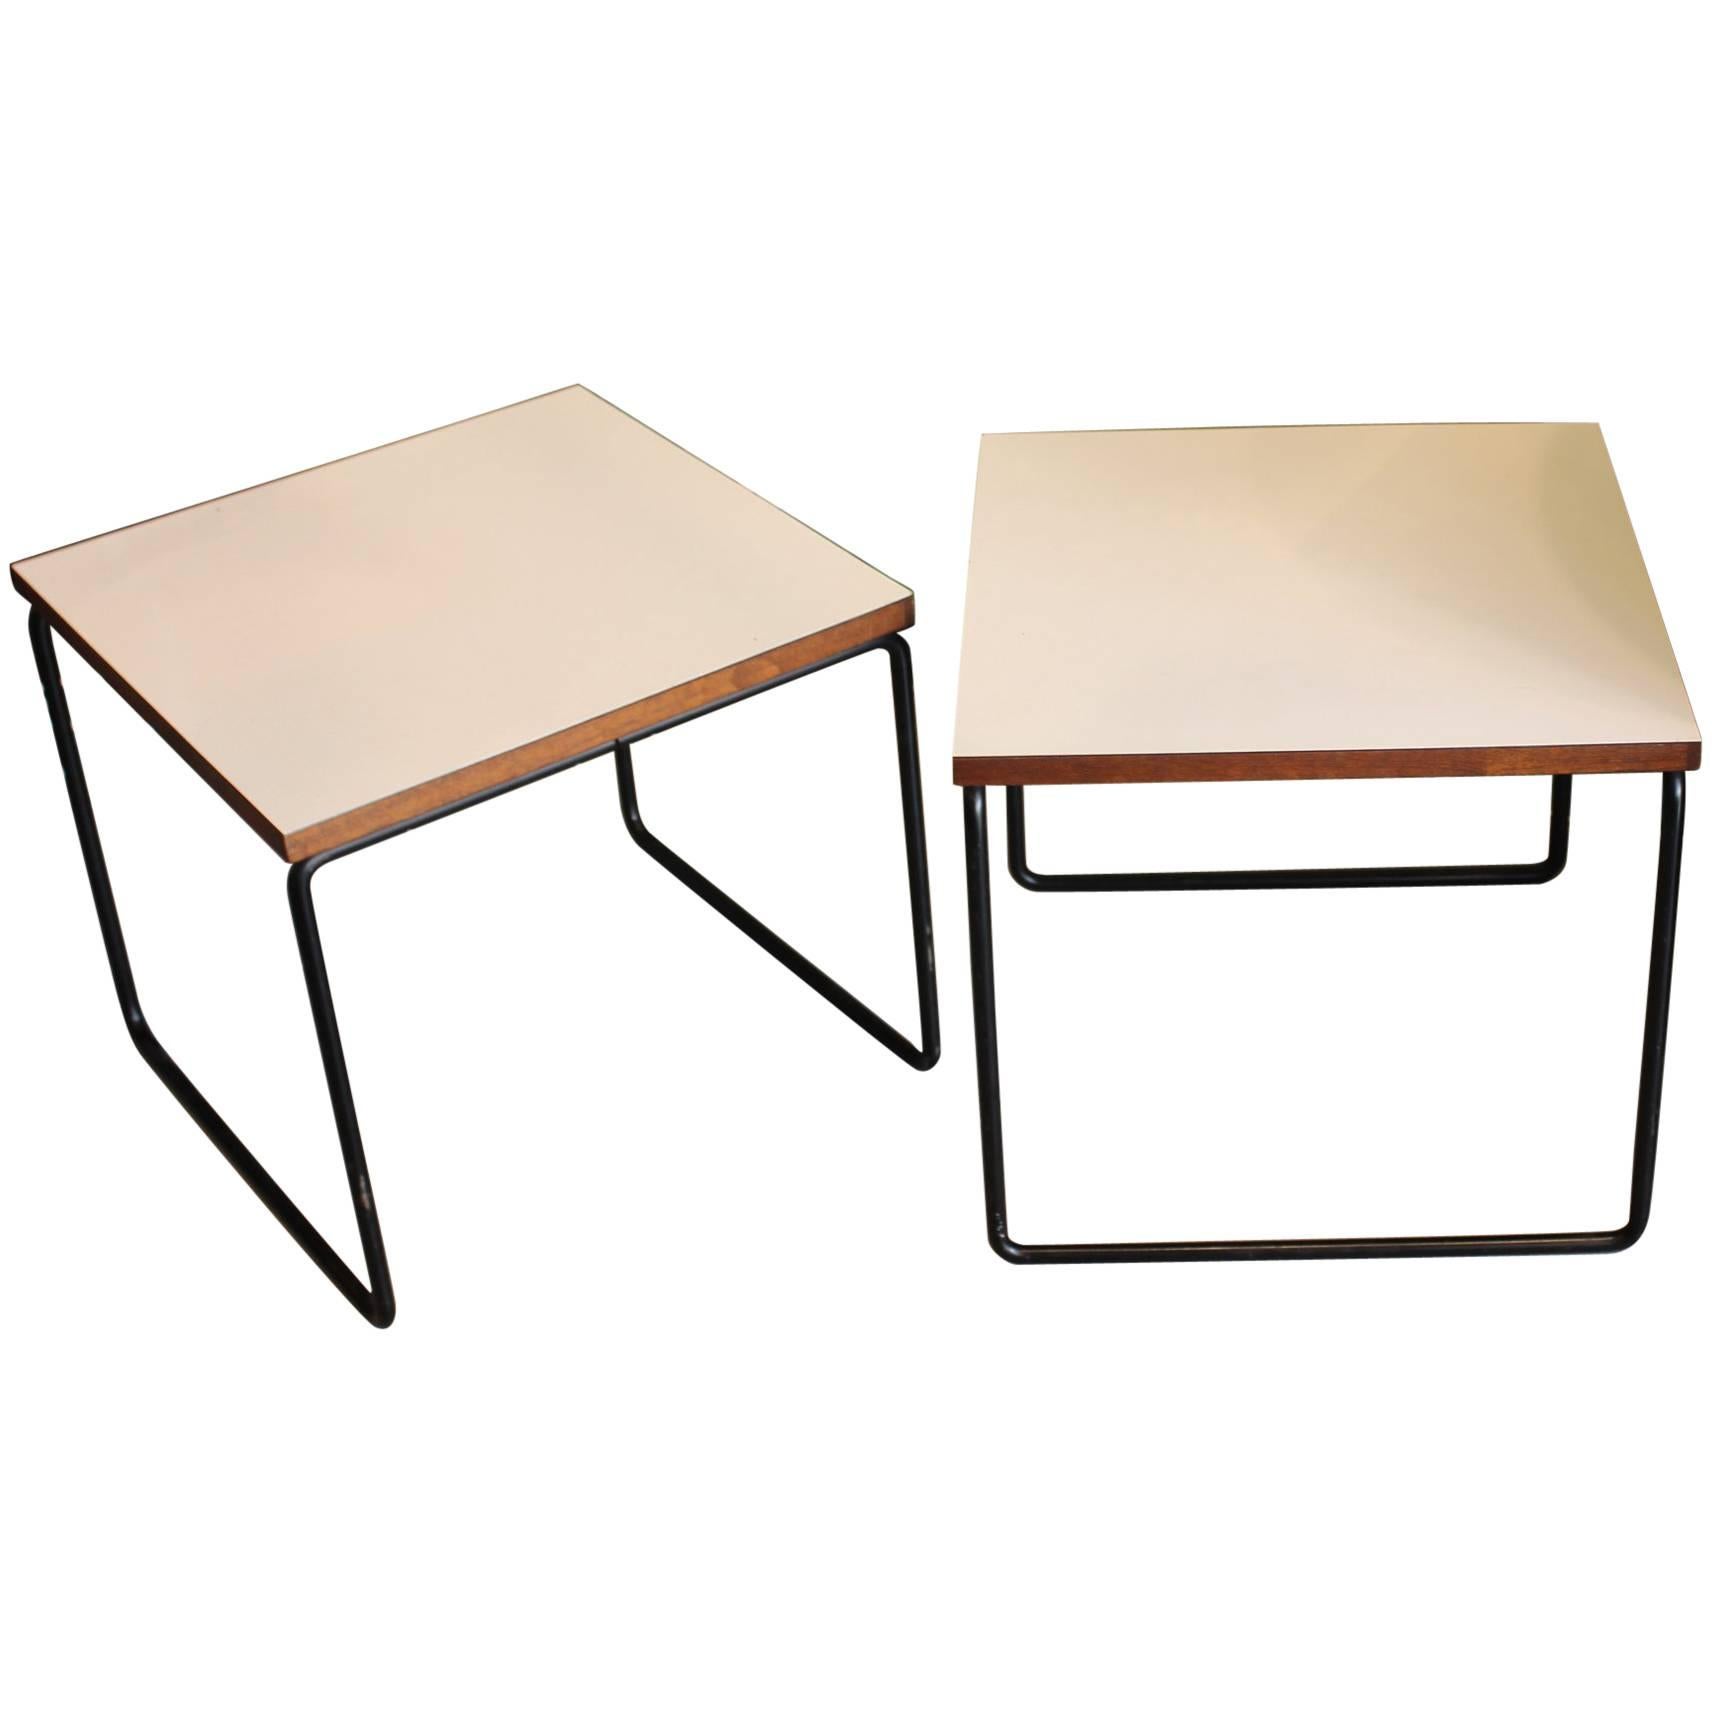 Pierre Guariche Beautiful Pair of Side Tables for Steiner, circa 1950 For Sale